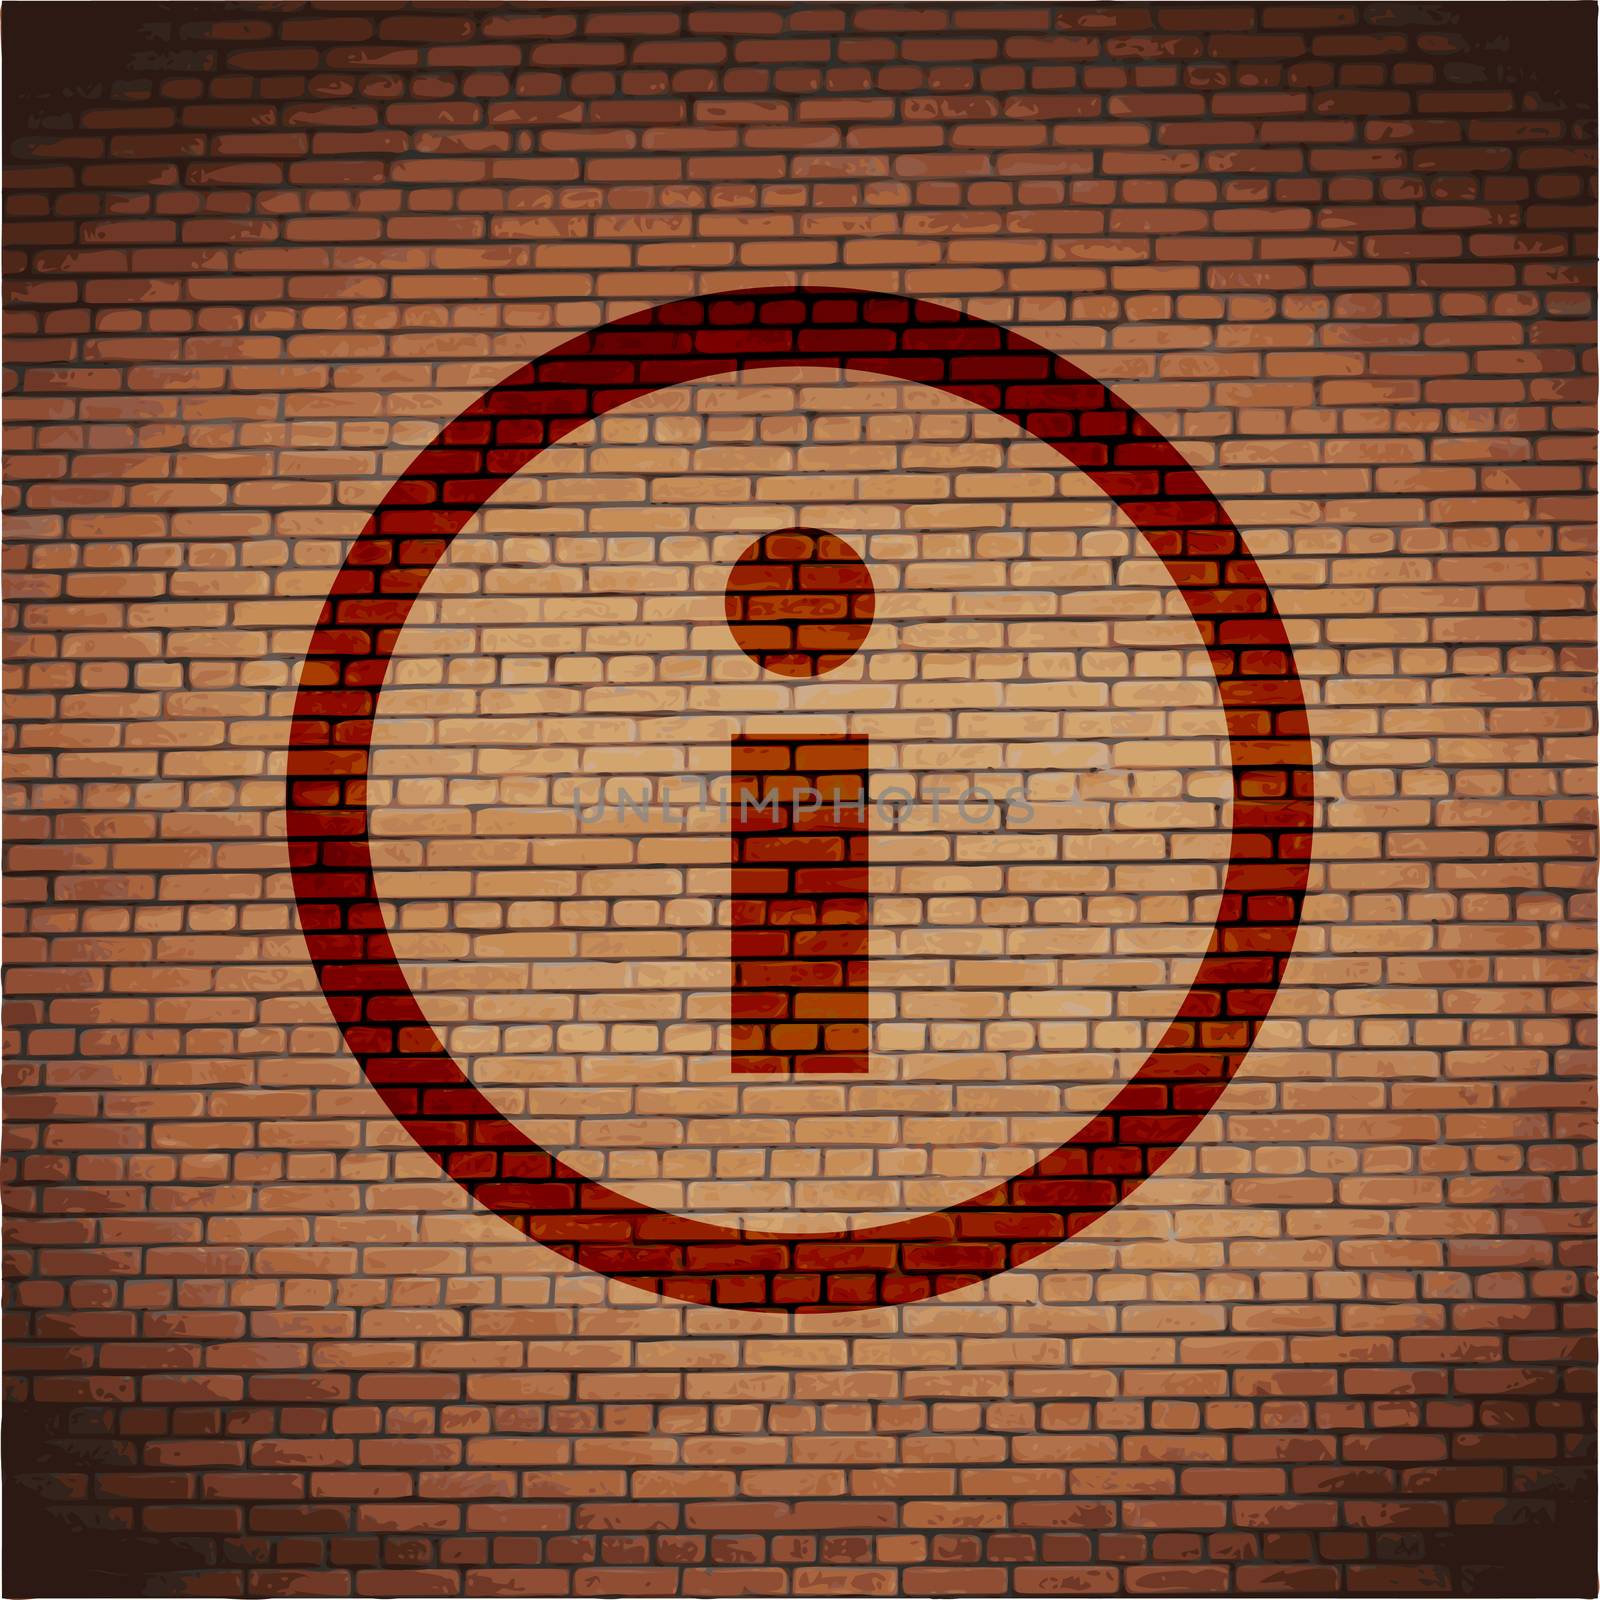 Information sign icon flat design with abstract background.